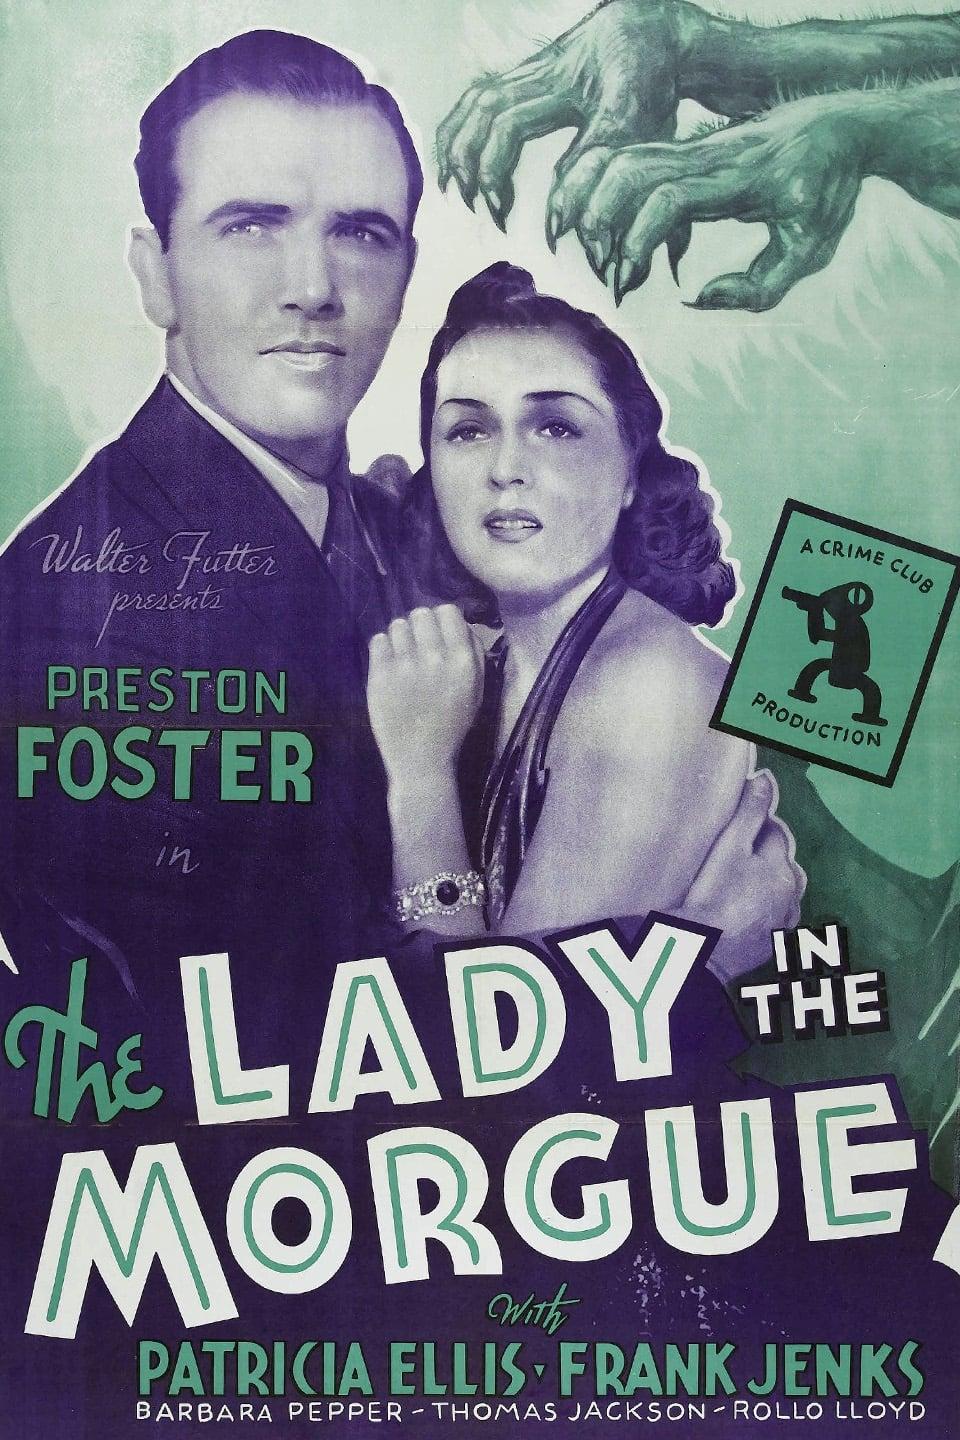 The Lady in the Morgue poster